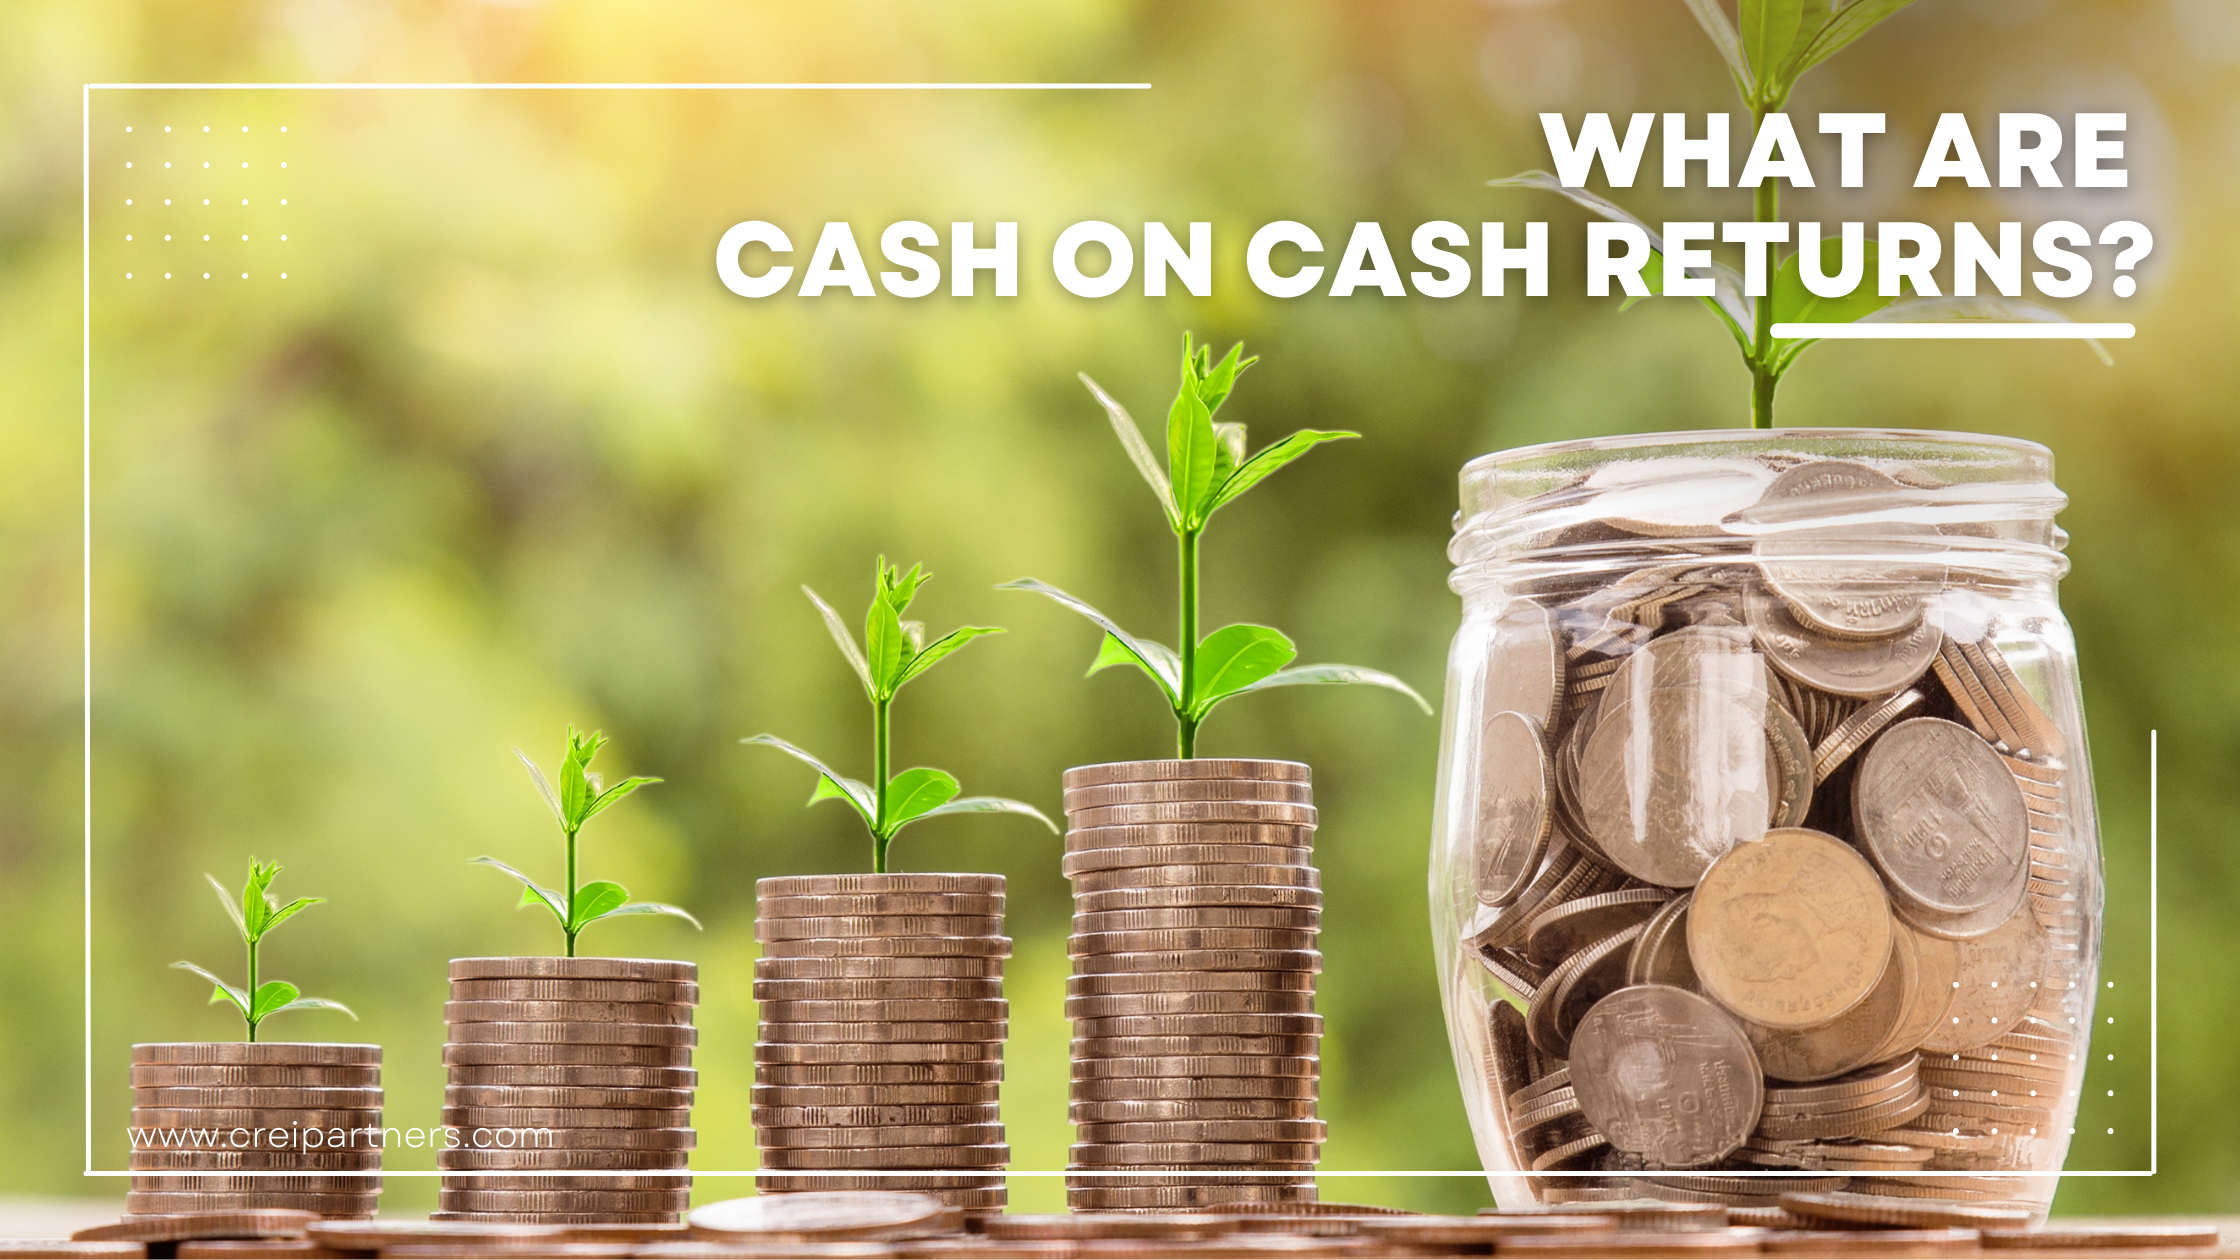 What are Cash on Cash Returns?